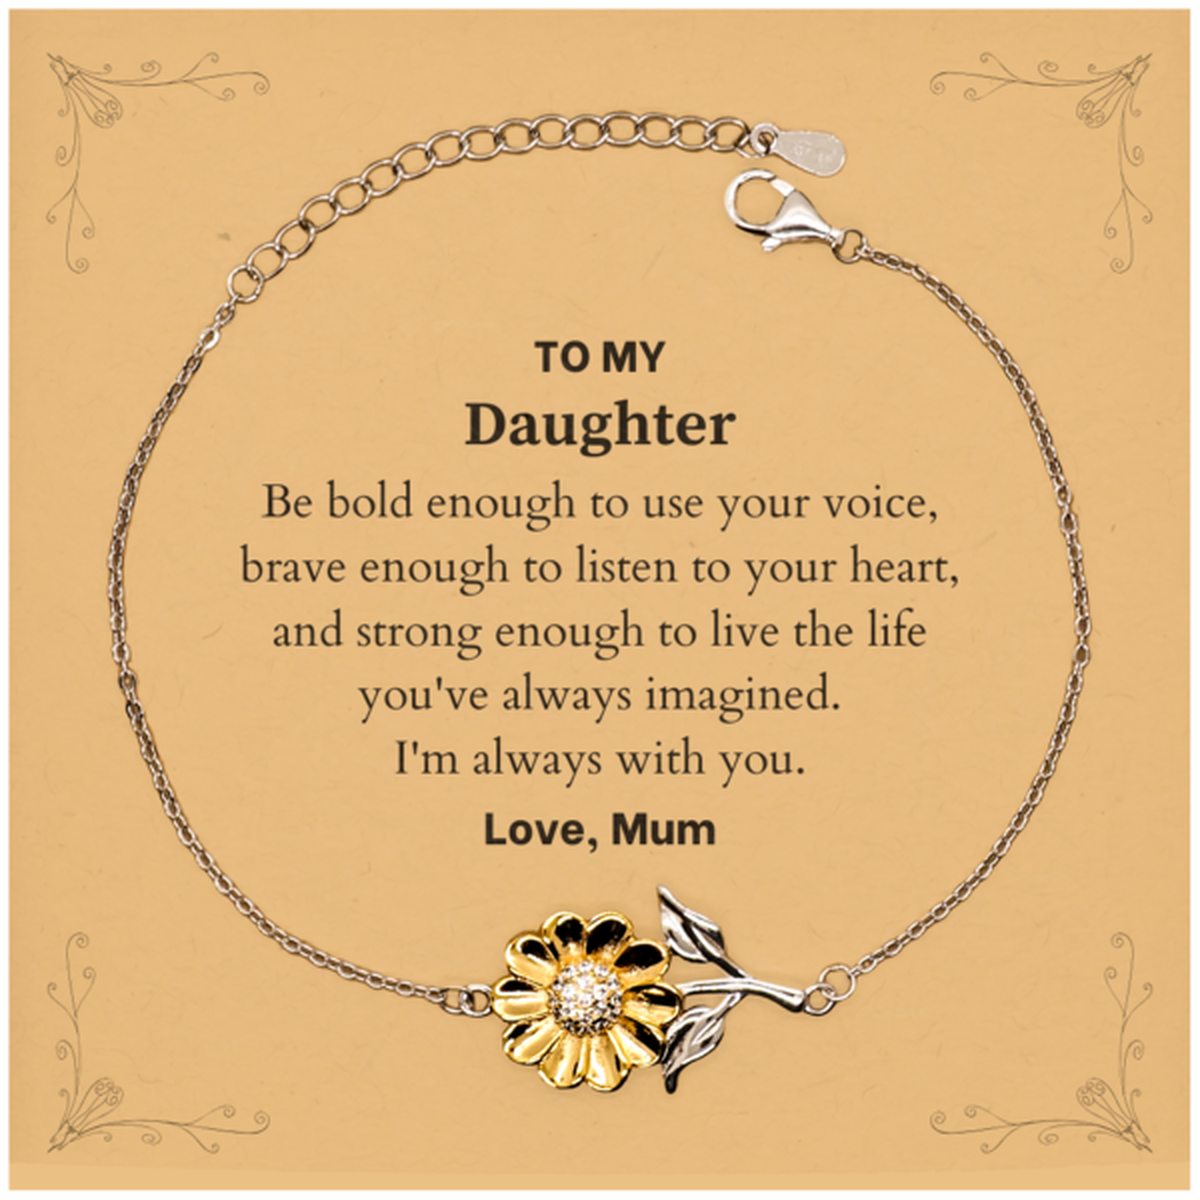 Keepsake Daughter Sunflower Bracelet Gift Idea Graduation Christmas Birthday Daughter from Mum, Daughter Be bold enough to use your voice, brave enough to listen to your heart. Love, Mum